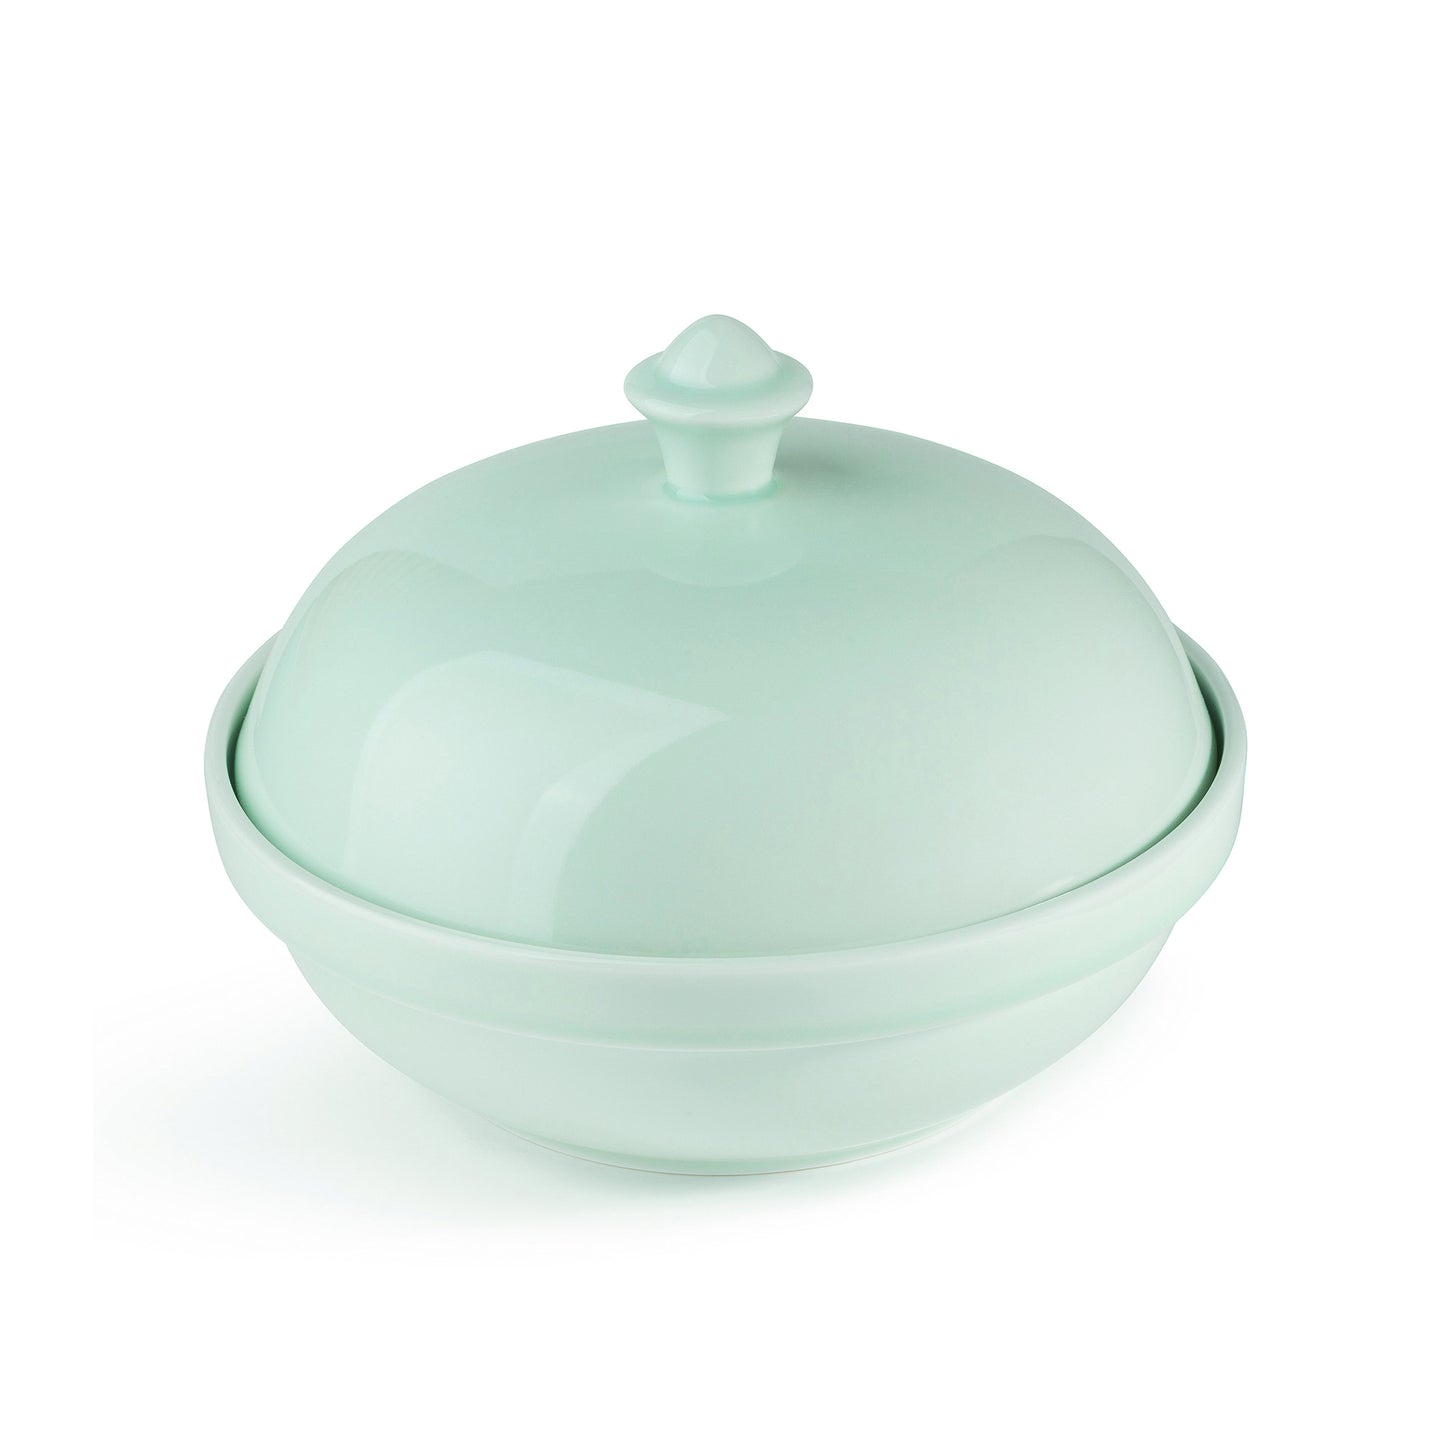 10" green celadon porcelain serving bowl with cover, cover on top, 30 degree angle view, media 5 of 5